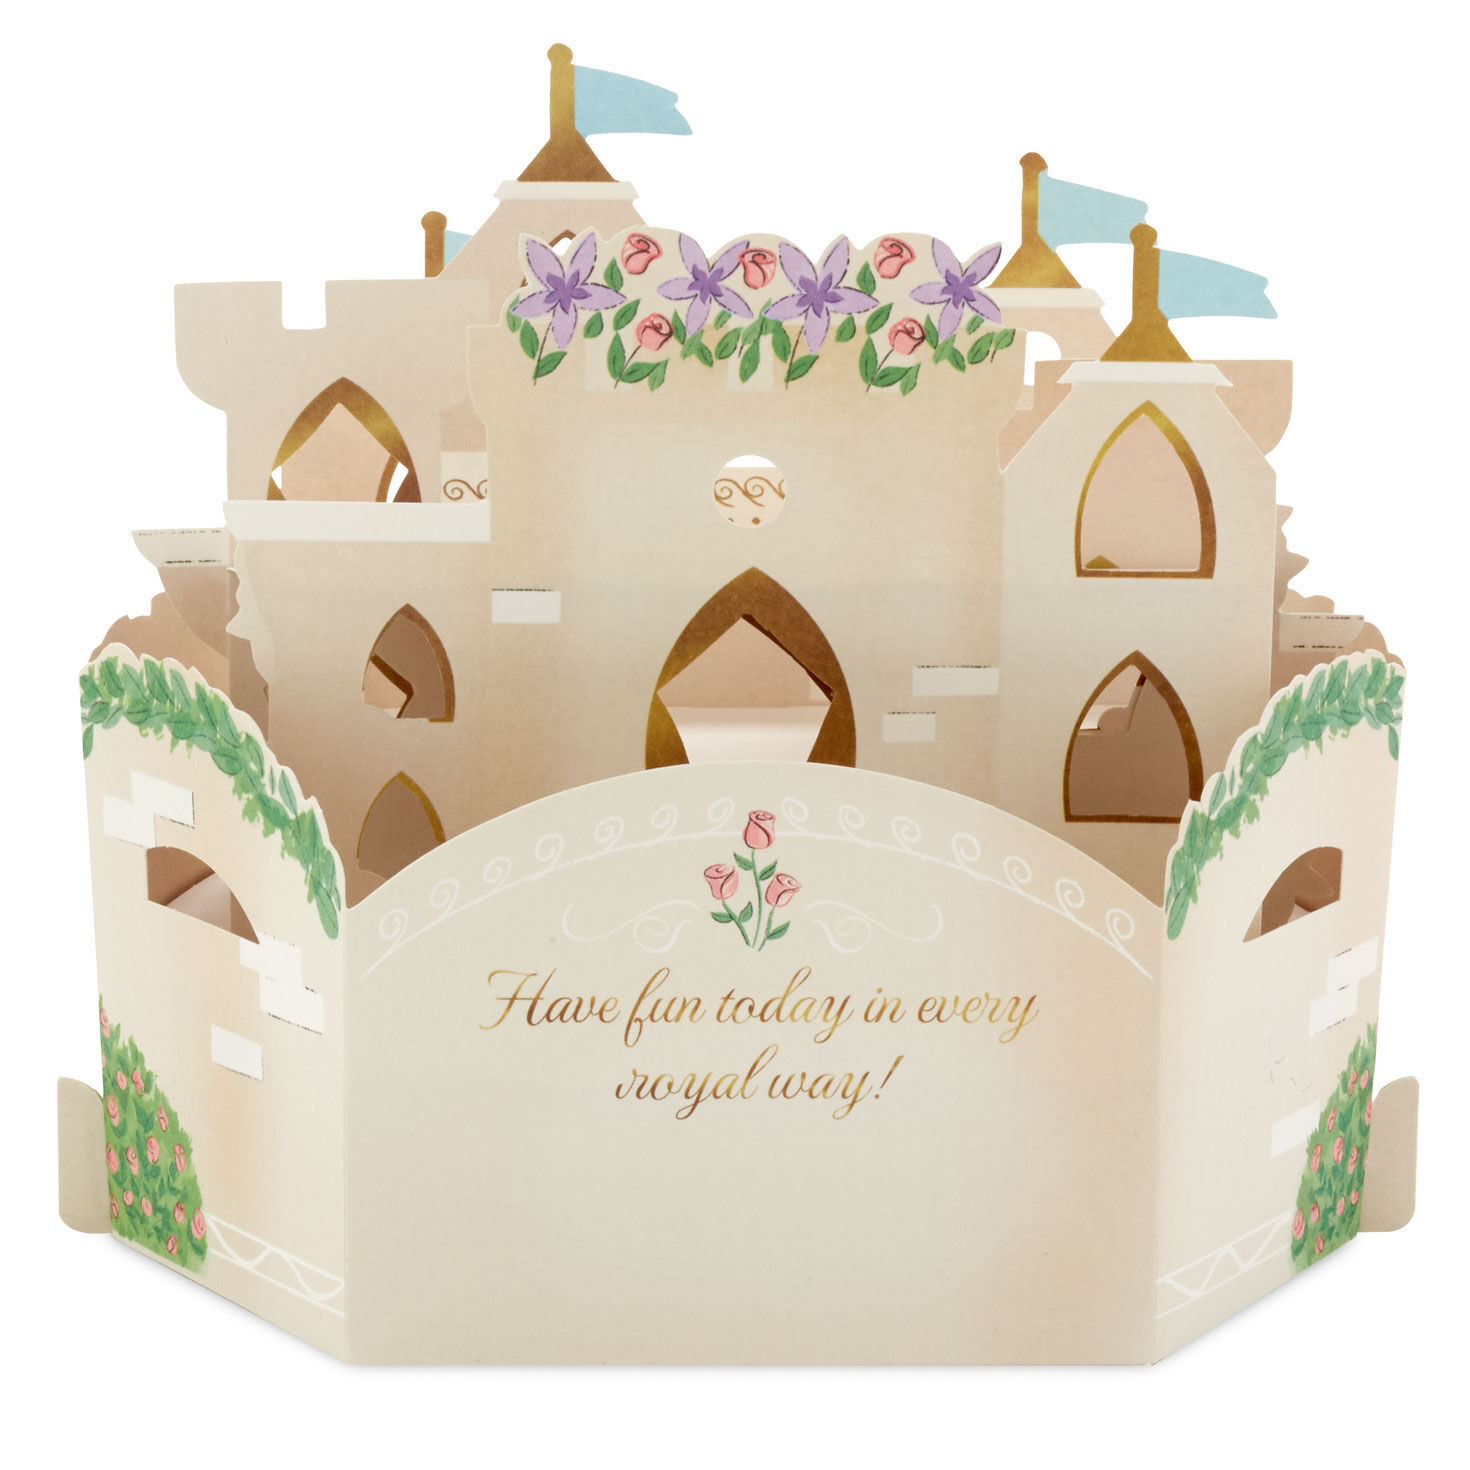 Disney Princess Castle All the Happiness 3D Pop-Up Card With Playset for only USD 8.99 | Hallmark